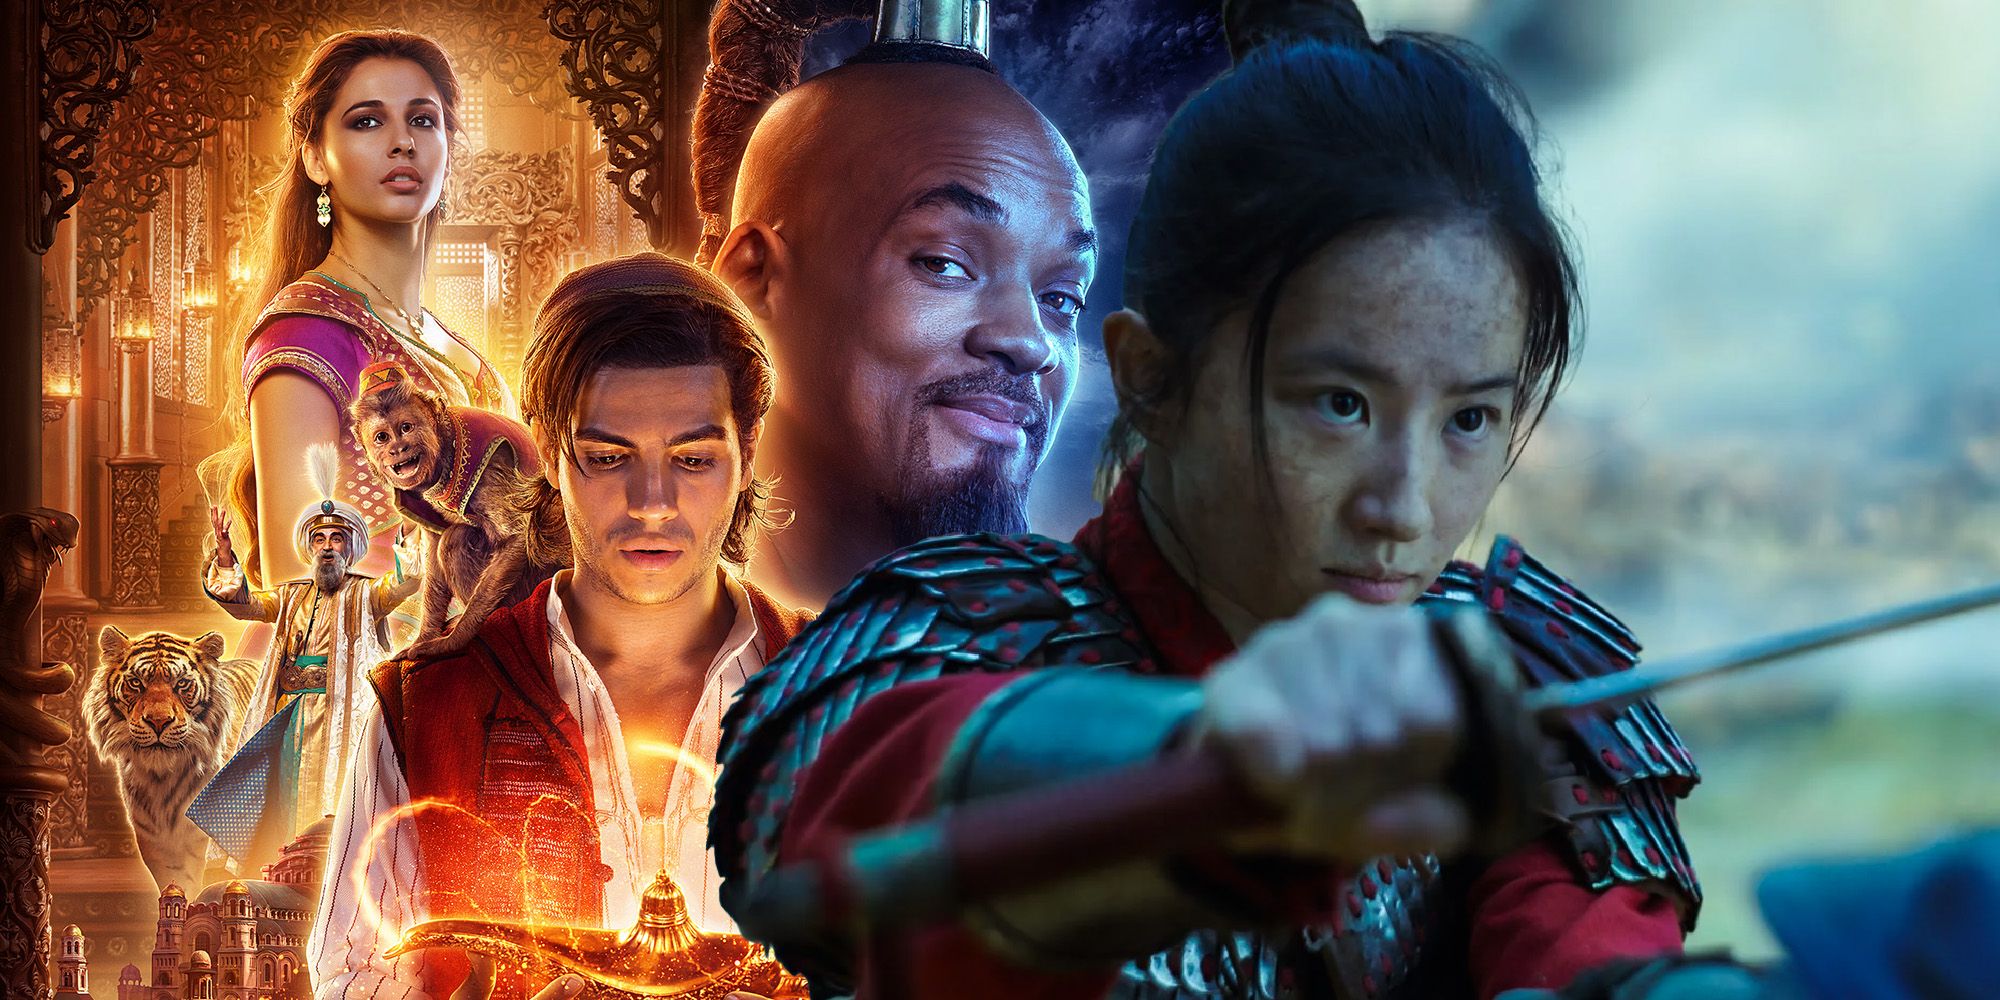 Mulan & Aladdin Remakes Were A Missed Opportunity For Cultural Collaboration